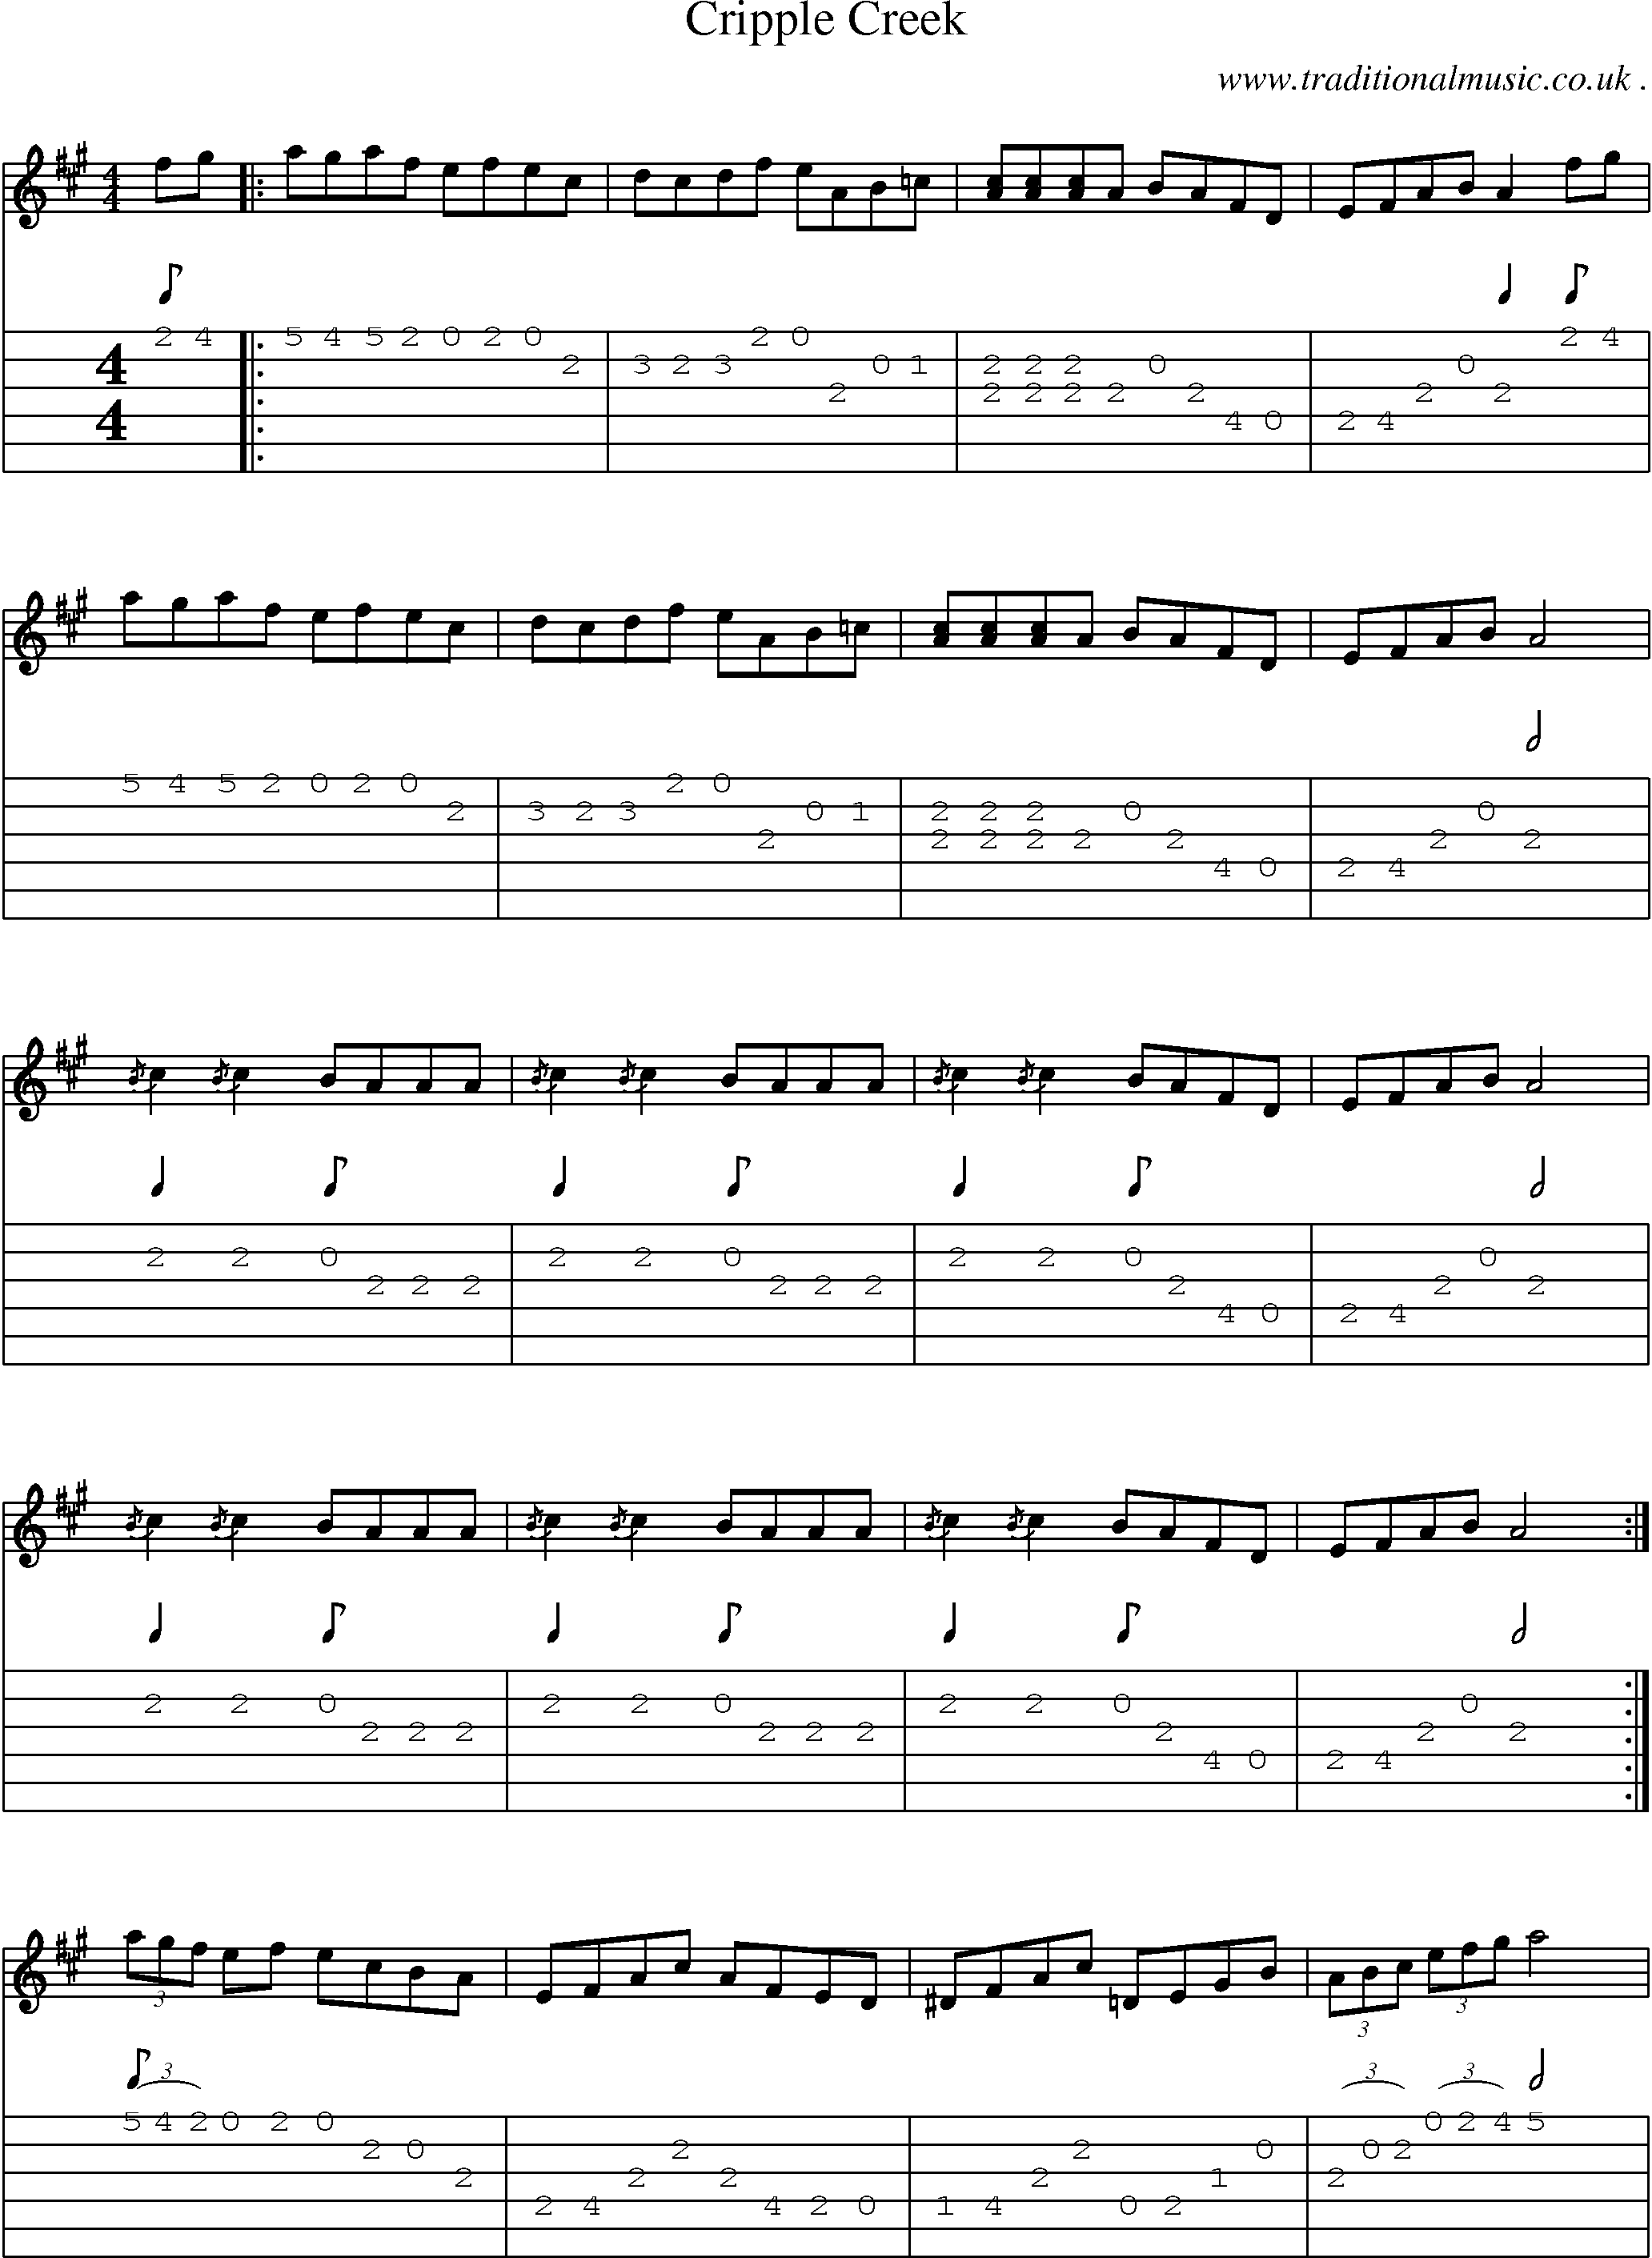 Music Score and Guitar Tabs for Cripple Creek